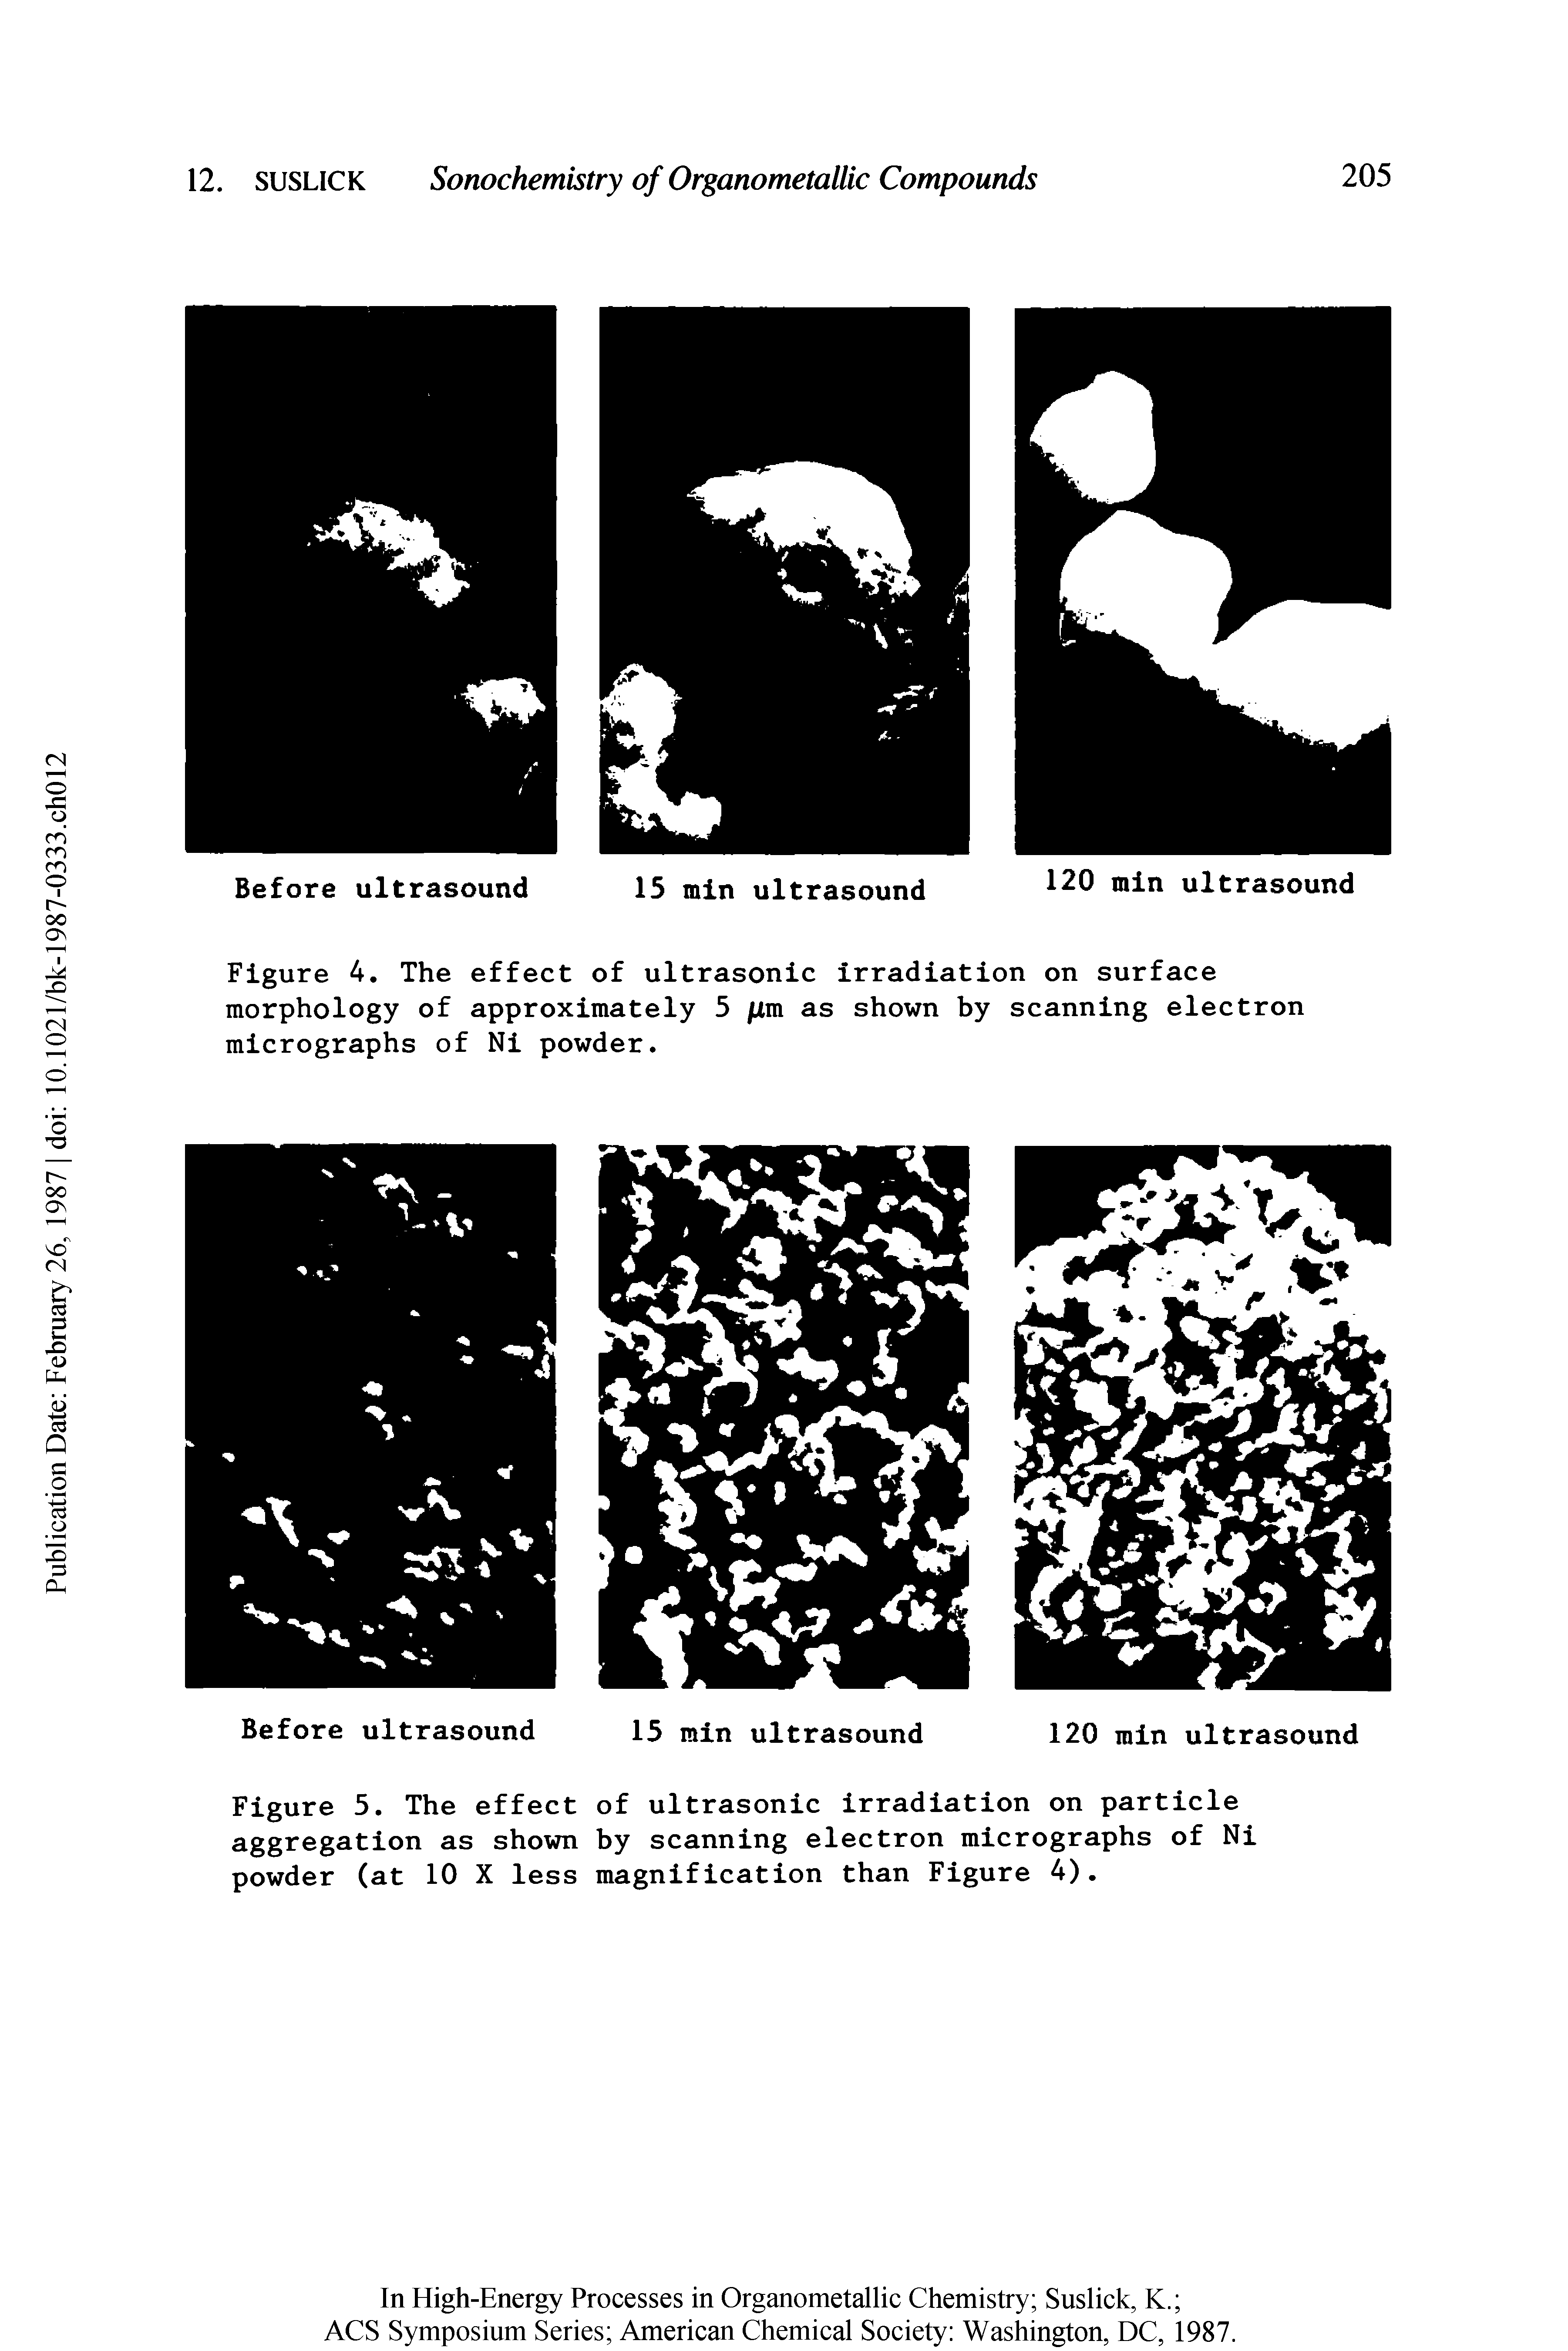 Figure 5. The effect of ultrasonic irradiation on particle aggregation as shown by scanning electron micrographs of Ni powder (at 10 X less magnification than Figure 4).